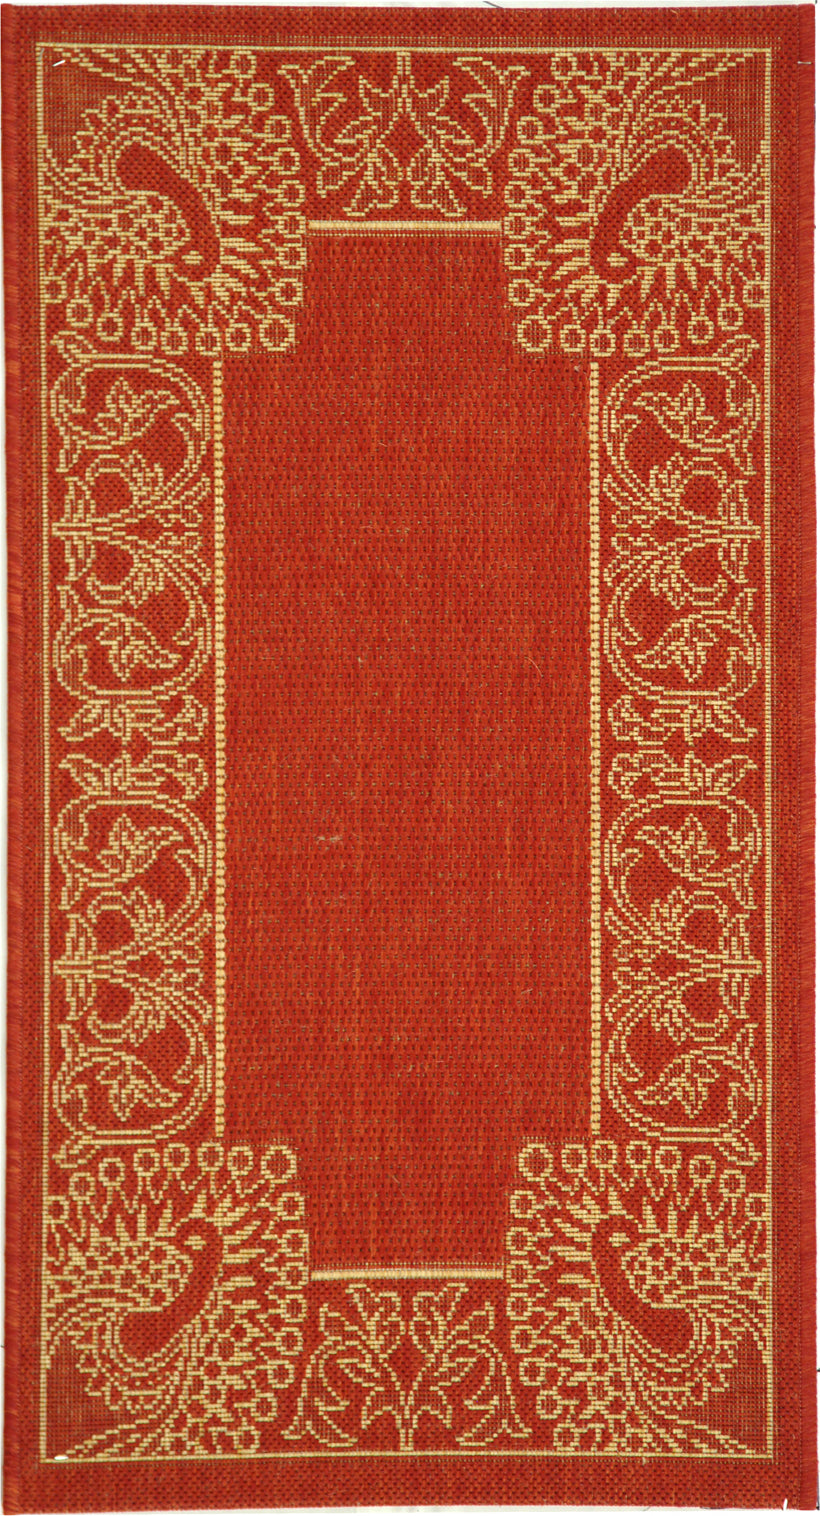 Safavieh Courtyard CY2965 Red/Natural Area Rug main image